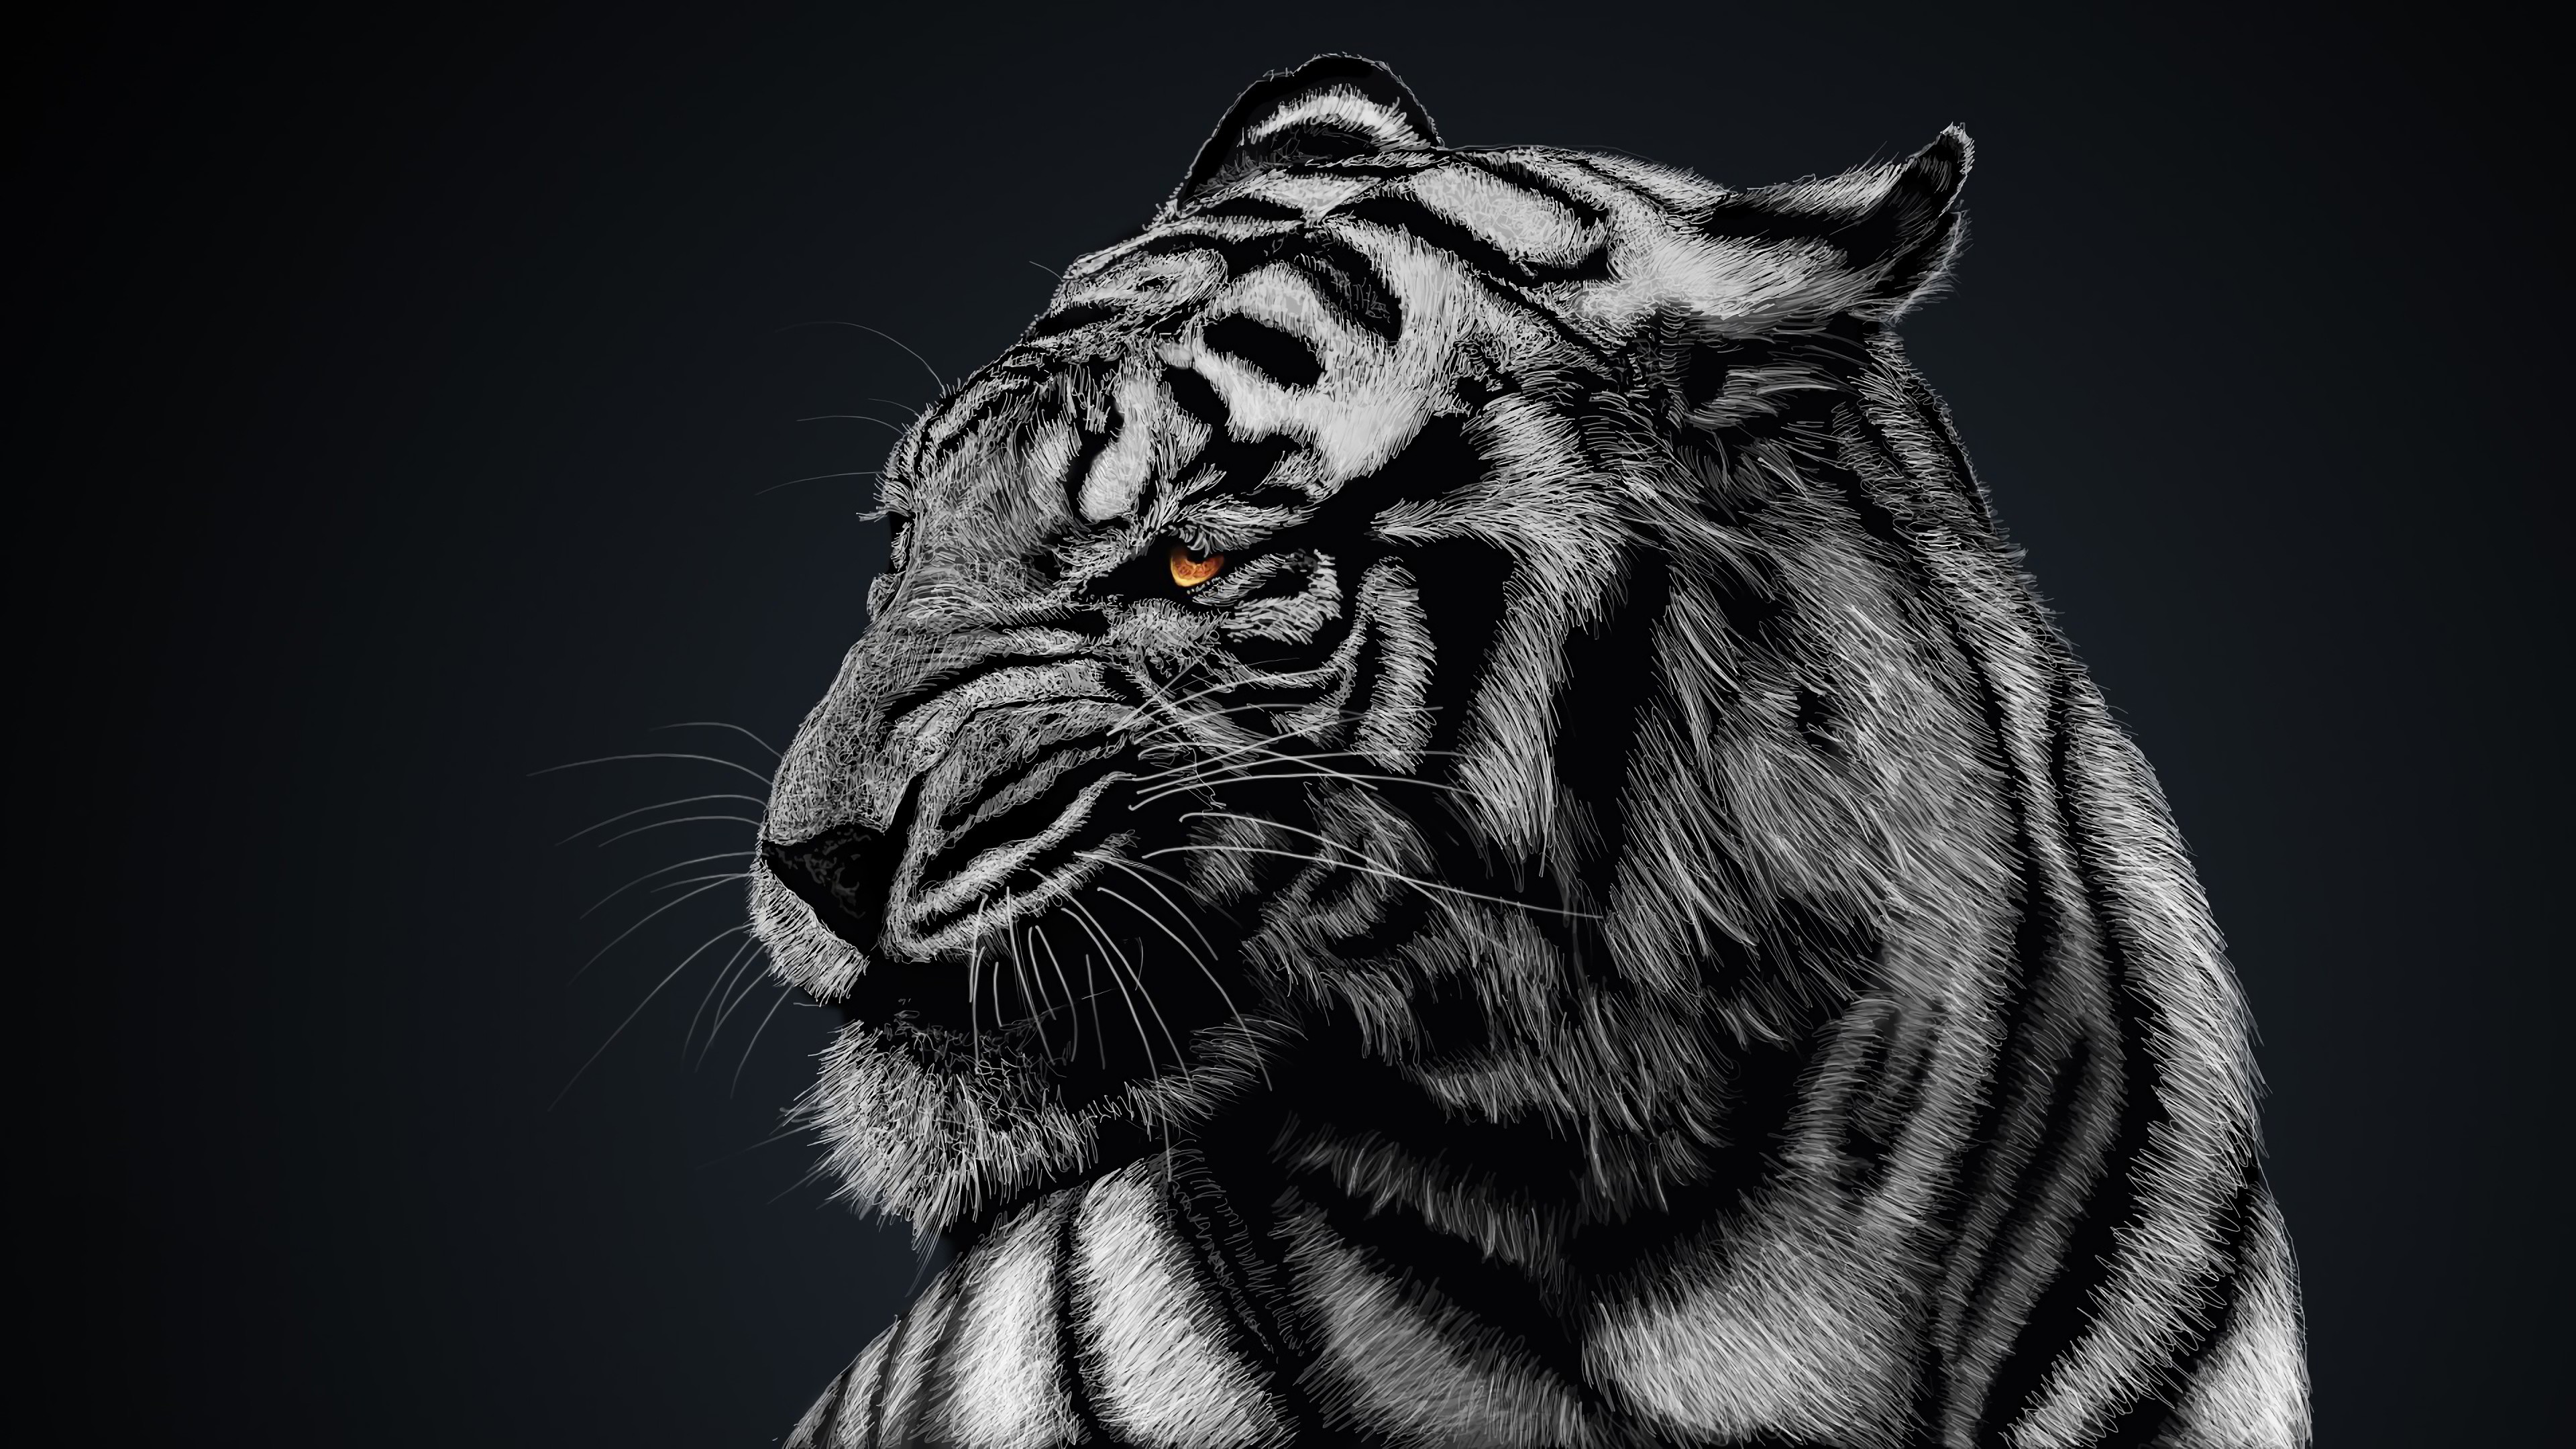 White Tiger Wallpapers 4k Ultra HD ID:3196.